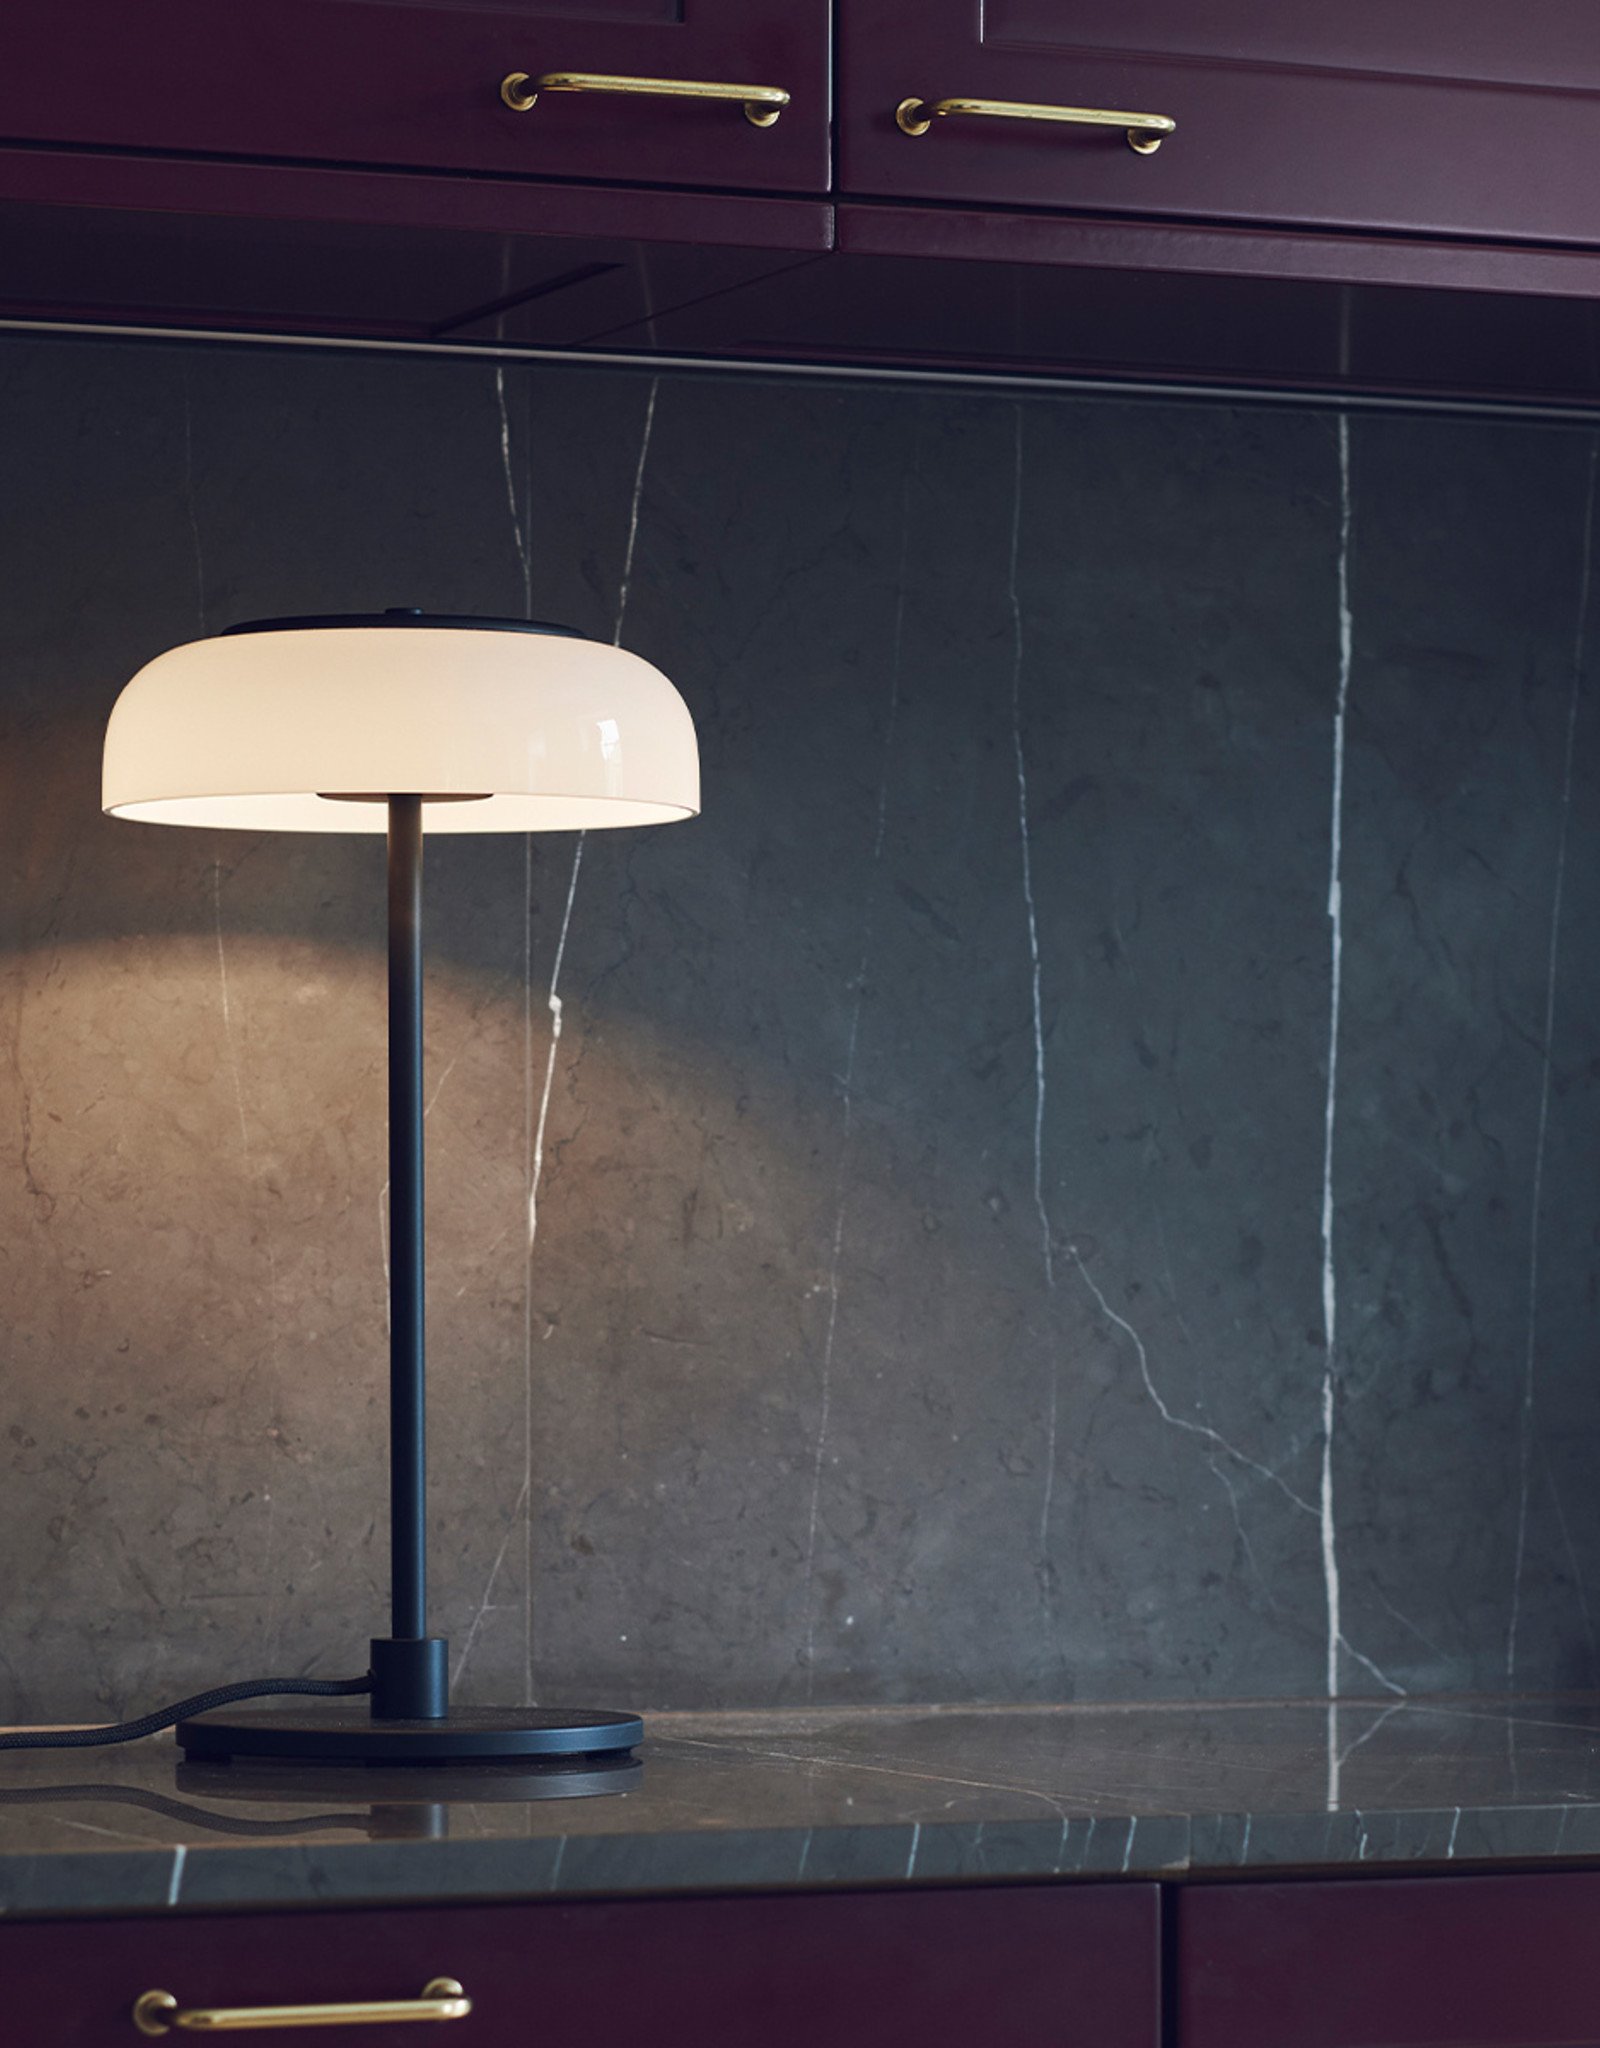 Nuura Blossi table light by Sofie Refer | Nordic black /opal